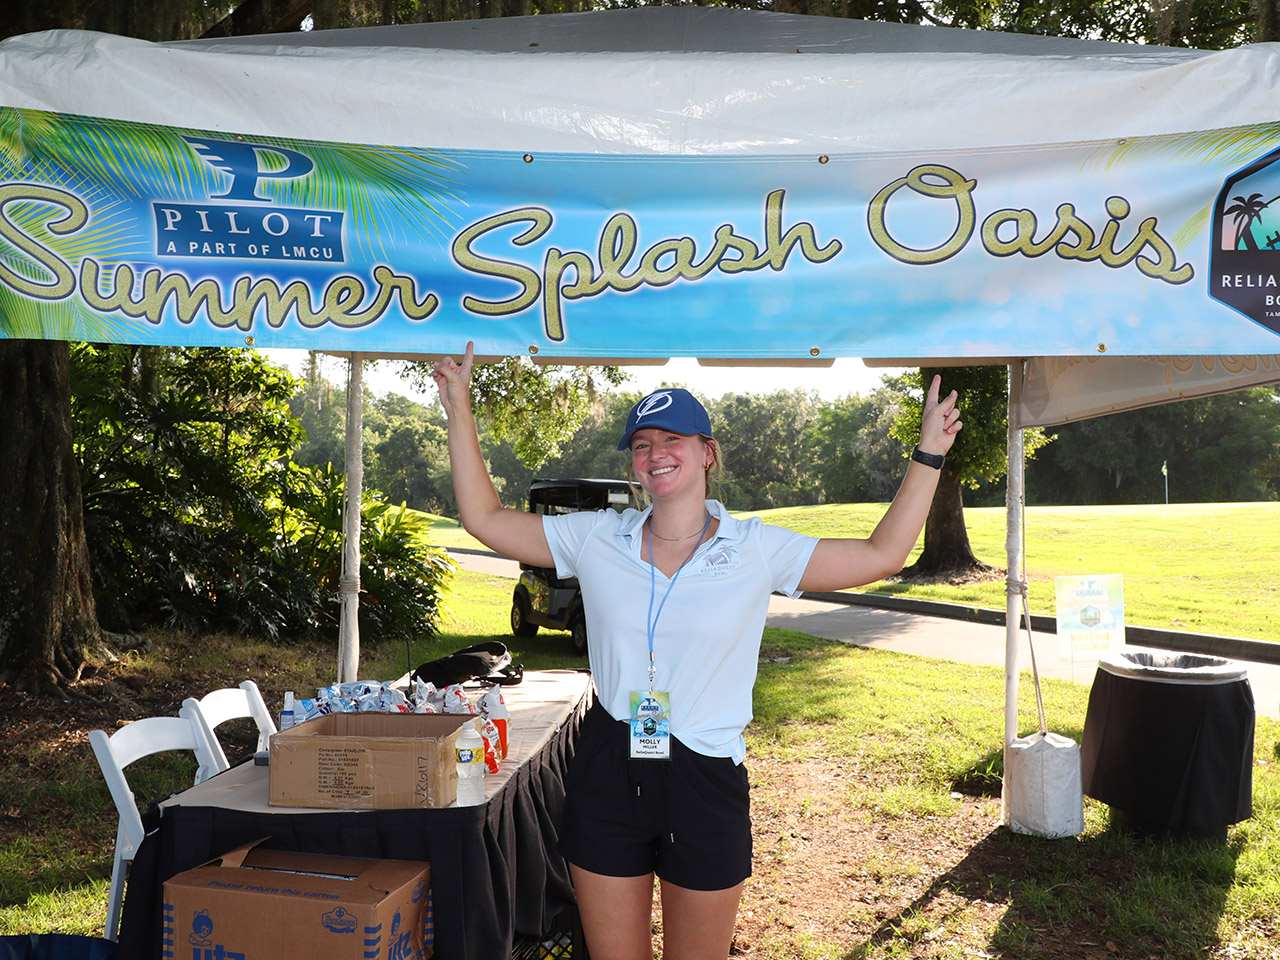 Multiple Oasis drink stations on the course for the golfers